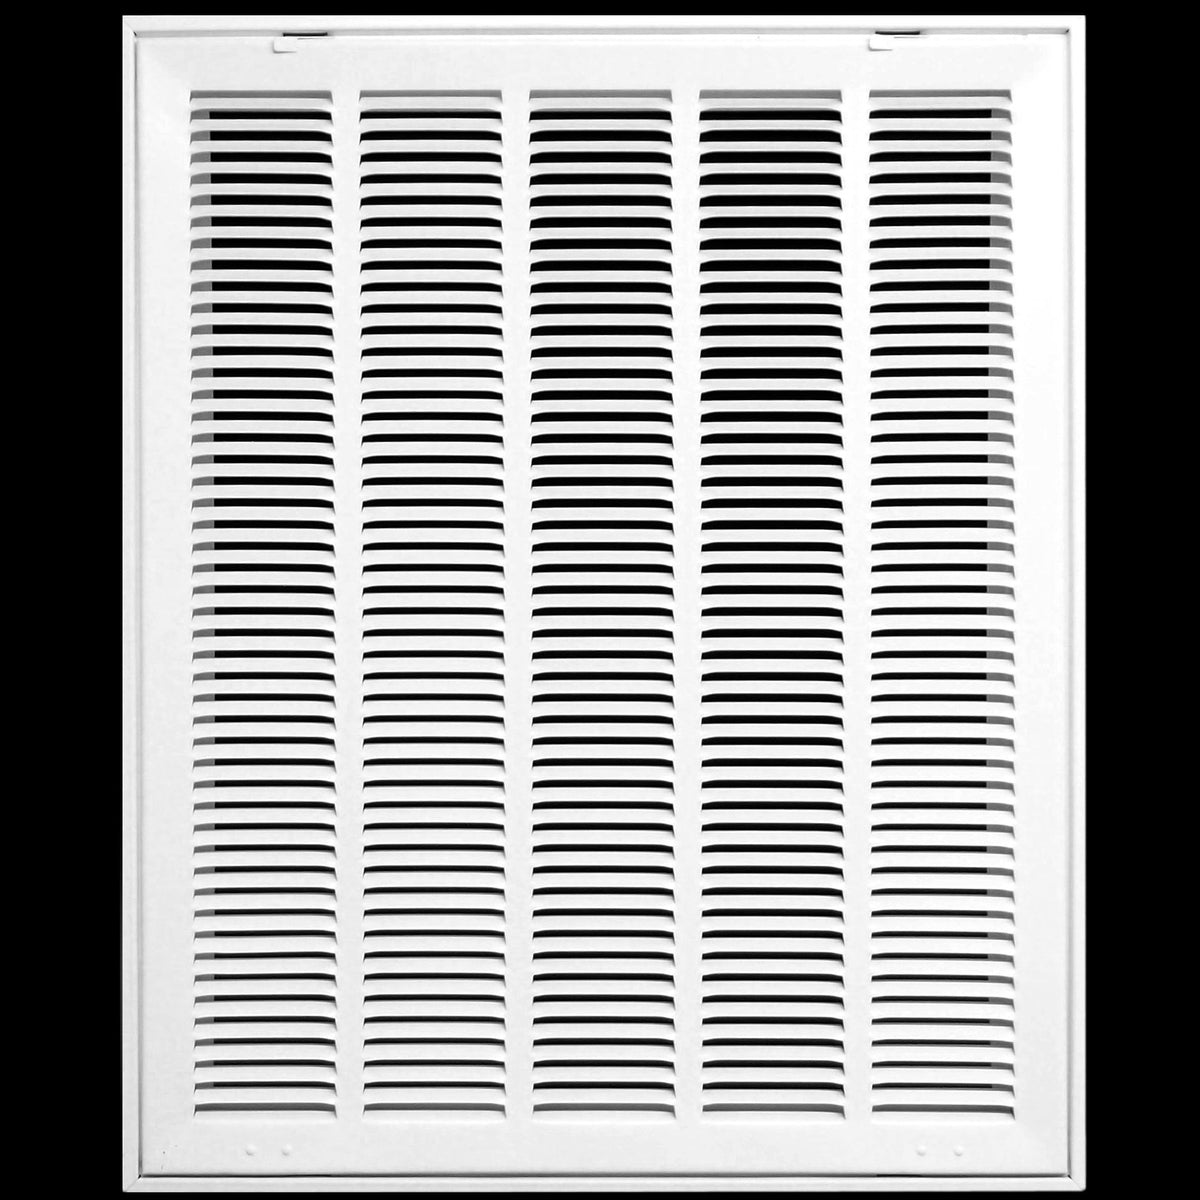 20&quot; X 24&quot; Steel Return Air Filter Grille for 1&quot; Filter - Fixed Hinged - [Outer Dimensions: 22 5/8&quot; X 20 5/8&quot;]